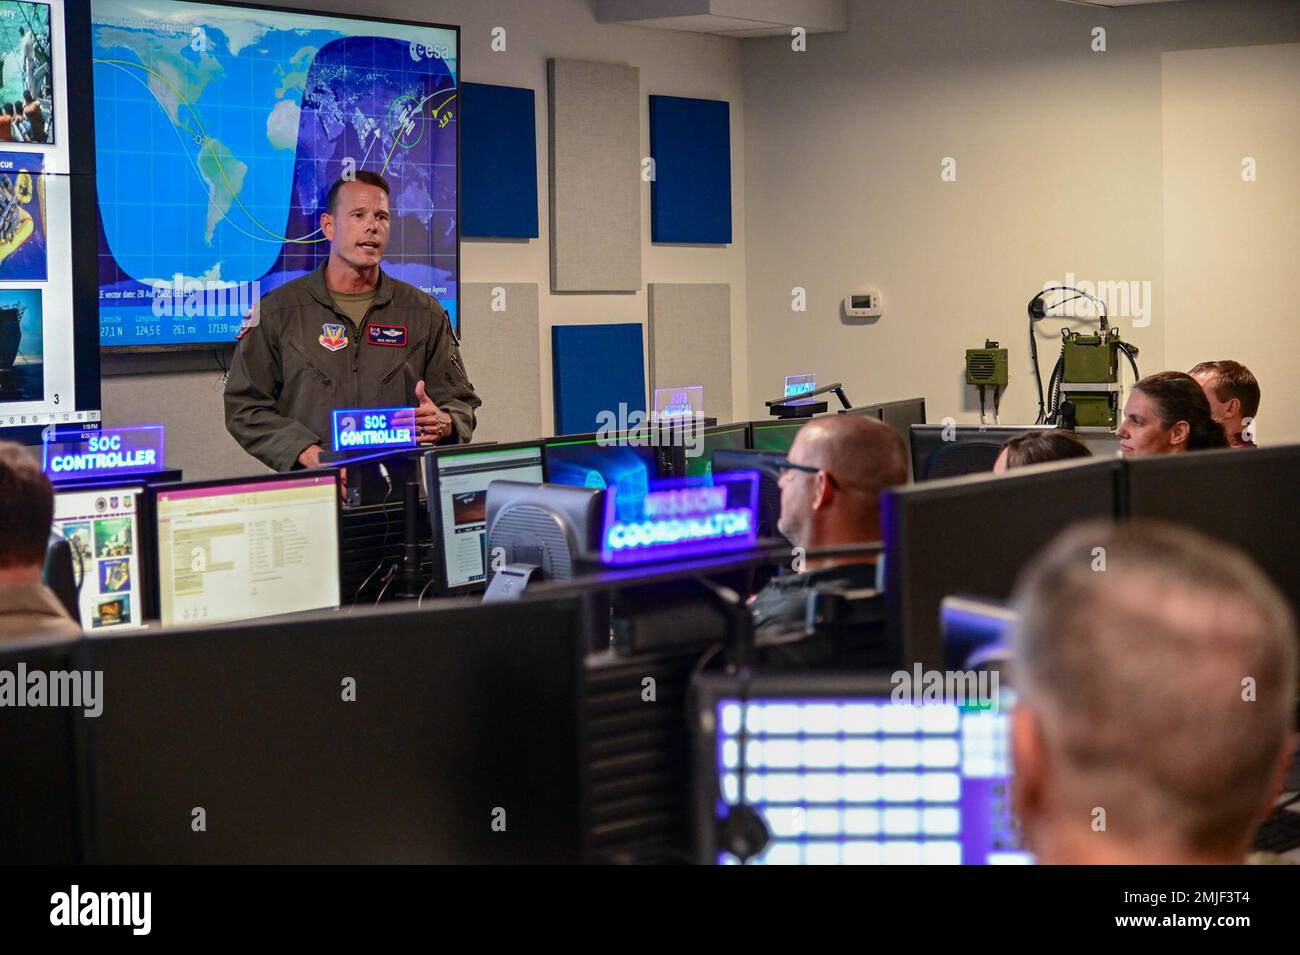 https://c8.alamy.com/comp/2MJF3T4/220828-f-bl637-1078-patrick-space-force-base-fl-aug-28-2022-air-force-lt-col-nick-pettit-assigned-to-first-air-force-detachment-three-speaks-to-army-gen-james-dickinson-us-space-command-commander-and-space-force-lt-gen-john-shaw-us-space-command-deputy-commander-during-a-usspacecom-leadership-visit-to-patrick-space-force-base-det-3-under-the-direction-of-usspacecom-is-the-dods-manager-for-human-space-flight-support-operations-for-nasas-crewed-space-flight-missions-2MJF3T4.jpg